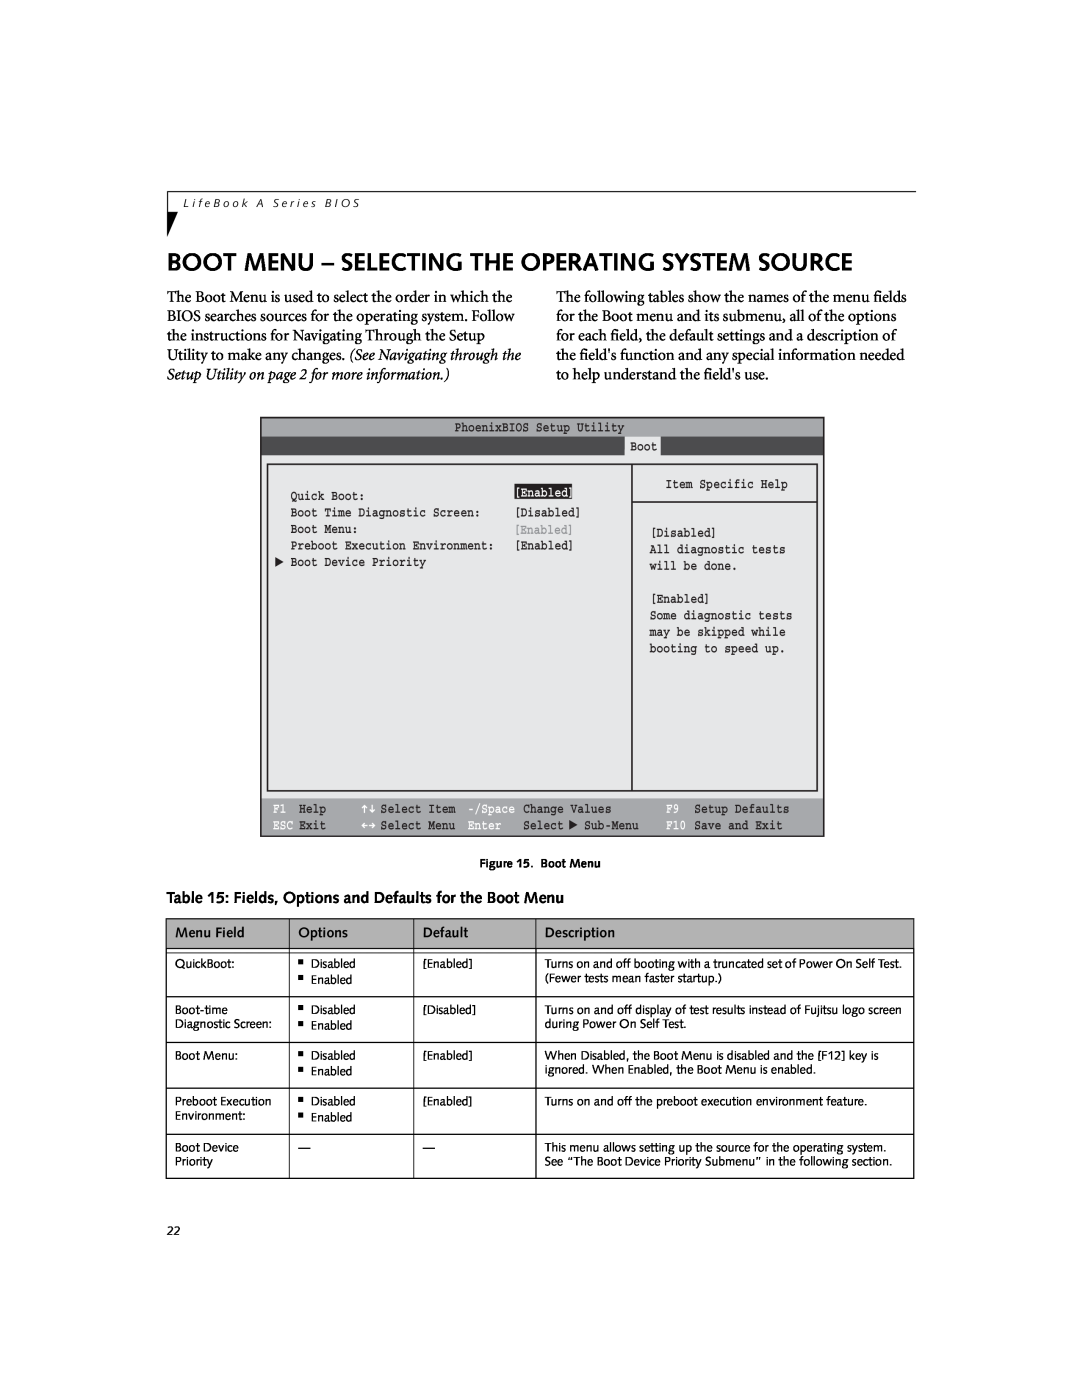 Fujitsu A6010 Boot Menu - Selecting The Operating System Source, Fields, Options and Defaults for the Boot Menu, ESC Exit 